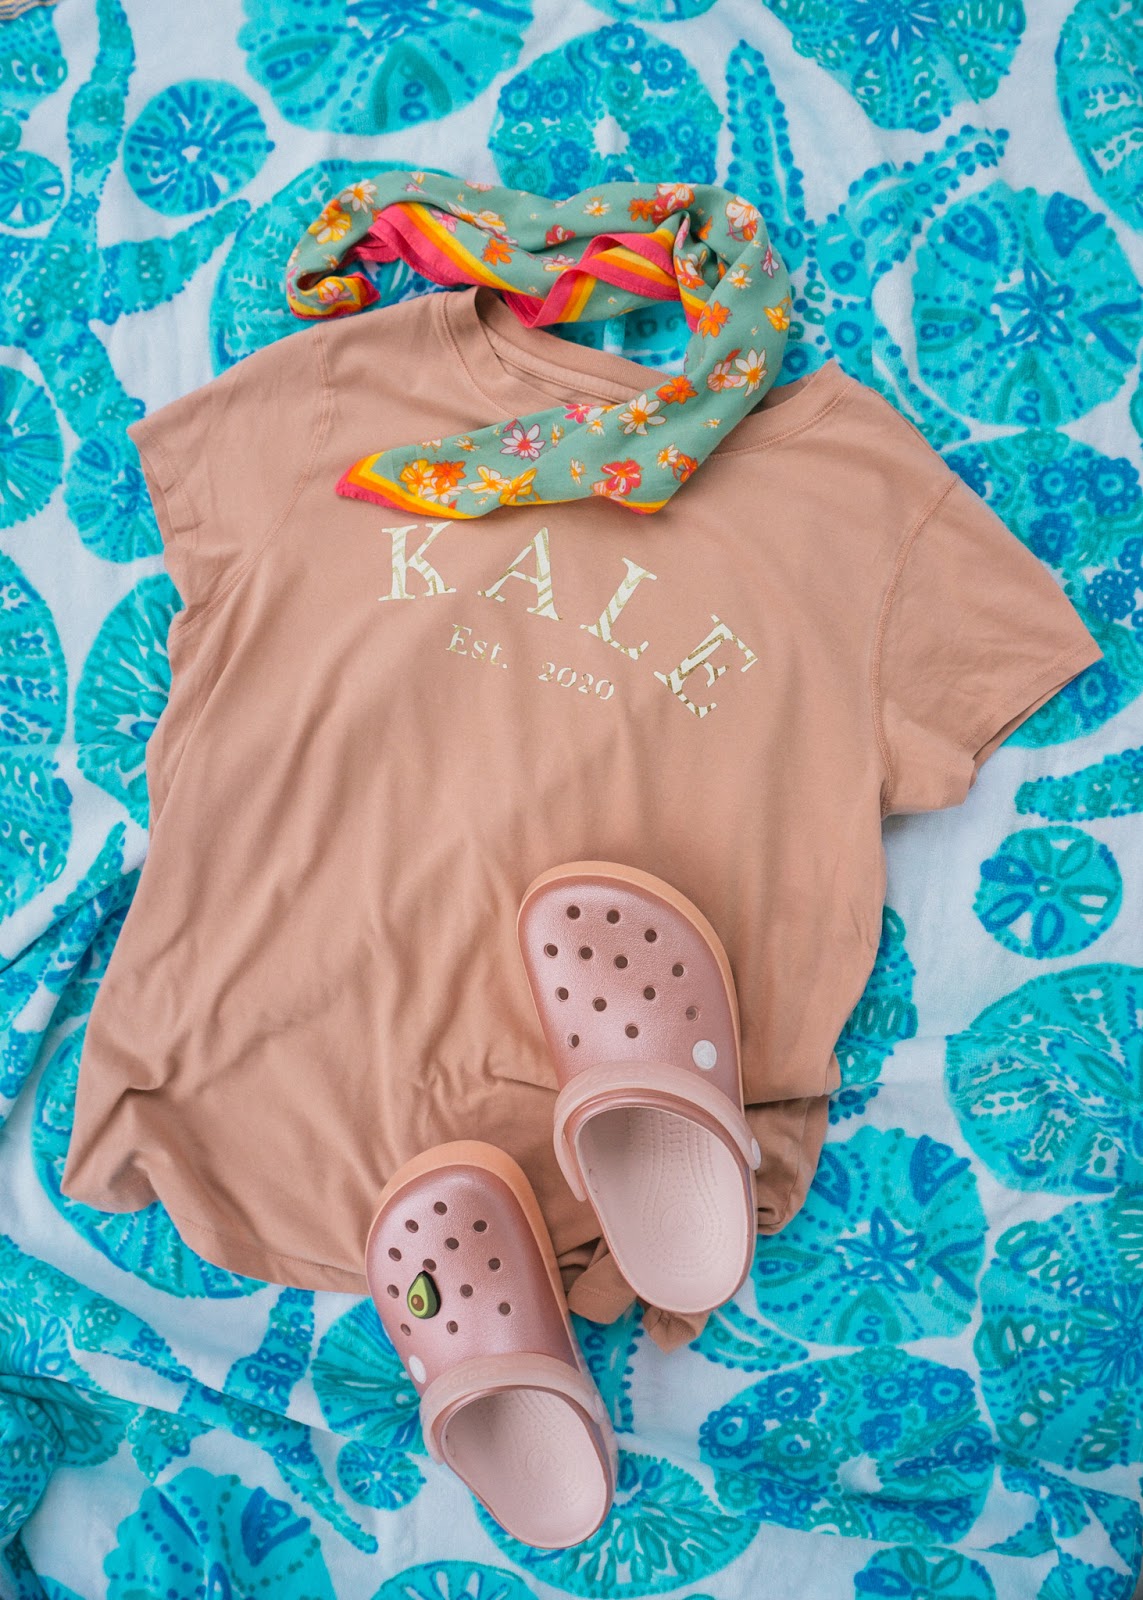 DIY T-Shirts Made Easy with the Cricut EasyPress and EasyPress Mat